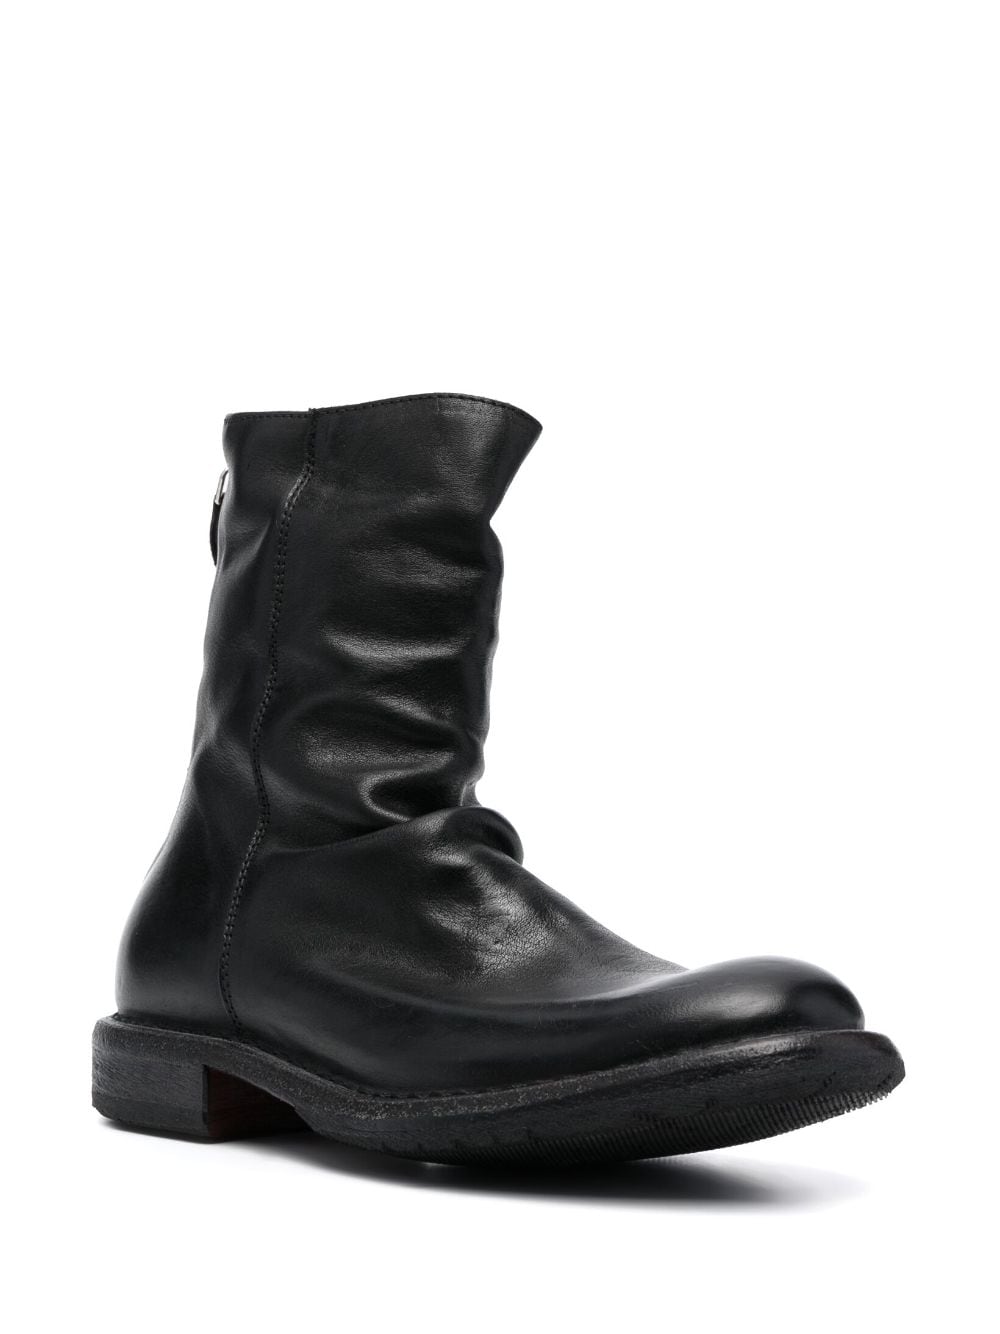 Moma Tronchetto Leather Ankle Boots - Farfetch